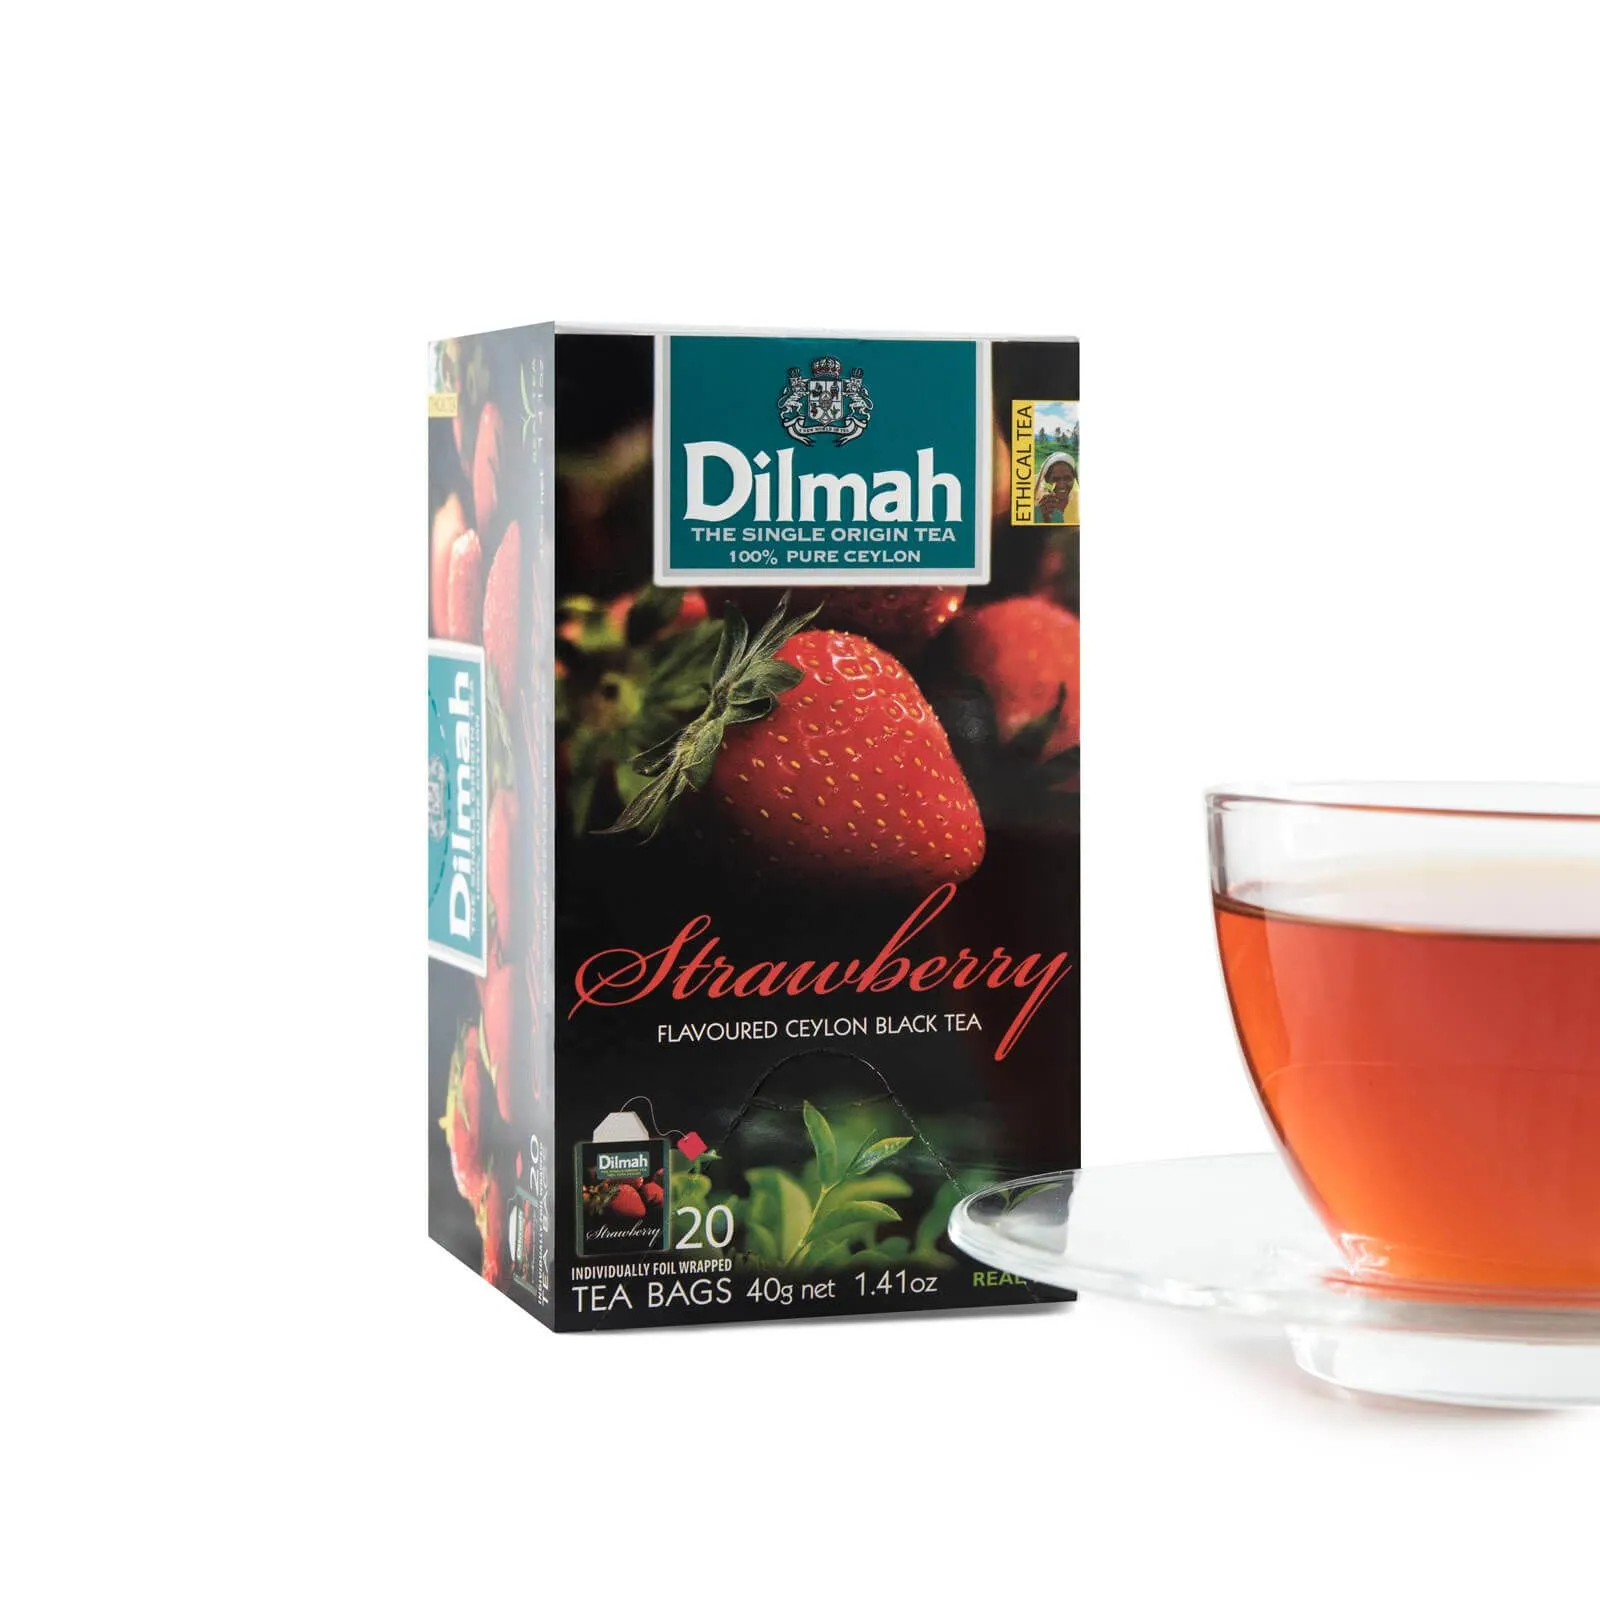 Pack of 20 individually wrapped tea bags of Strawberry black tea and a cup of tea